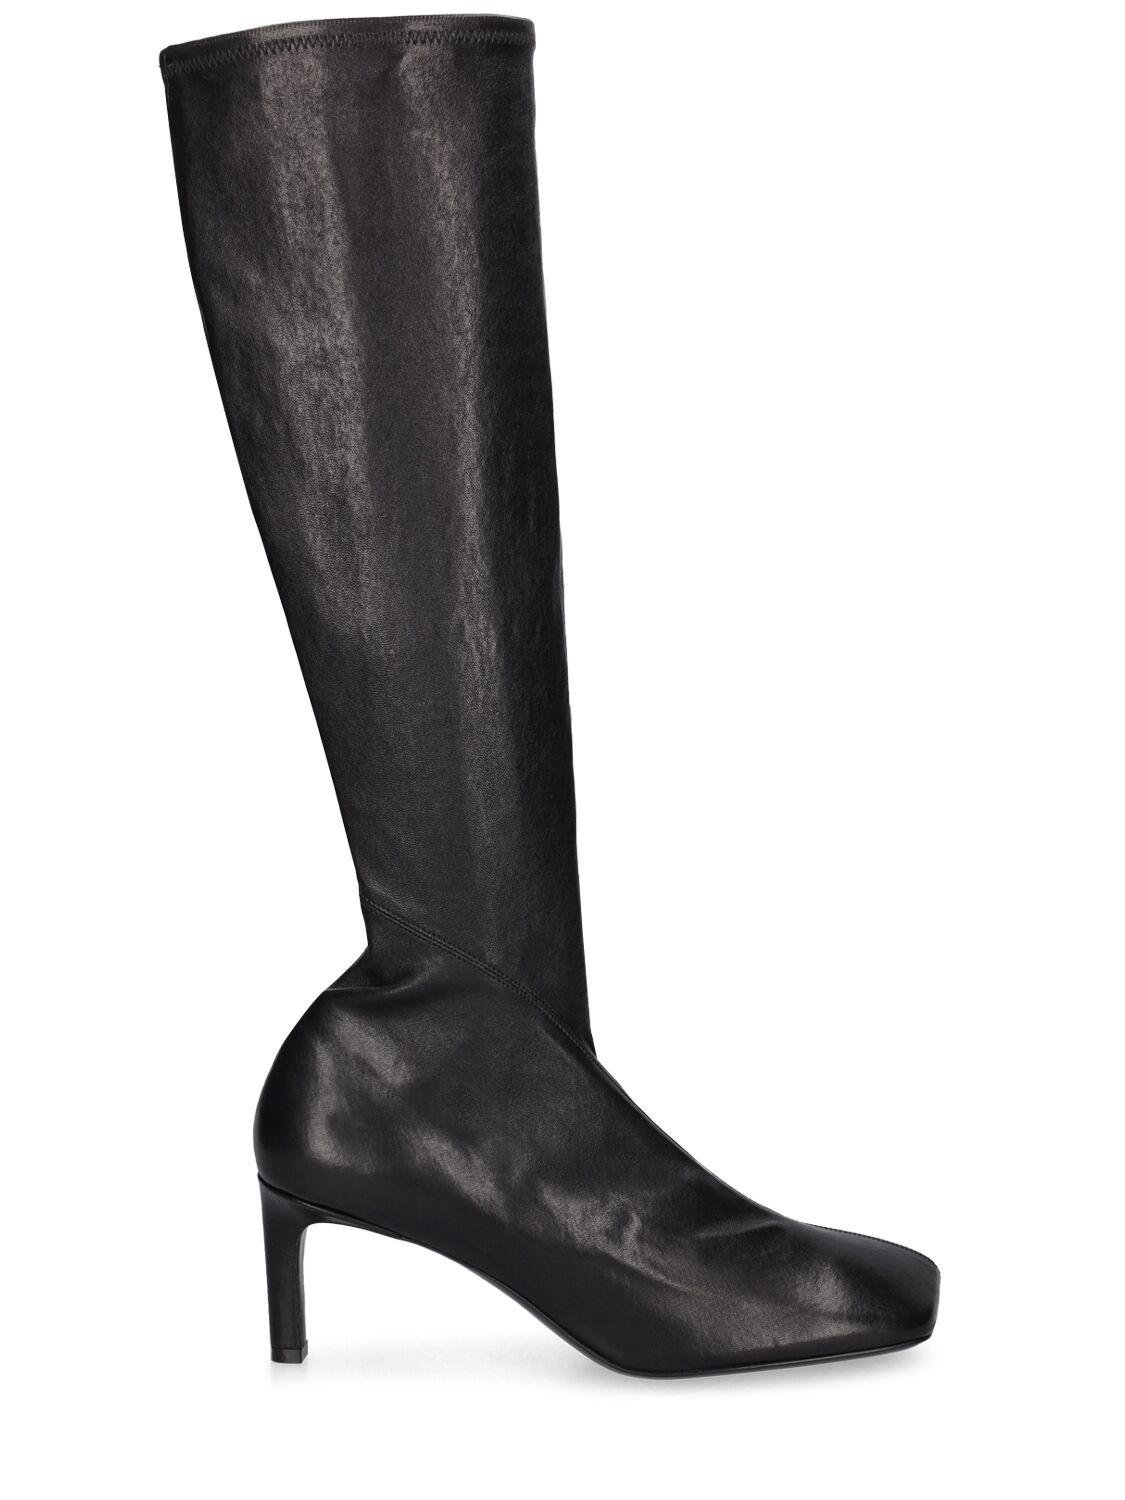 65mm Leather Tall Boots by JIL SANDER